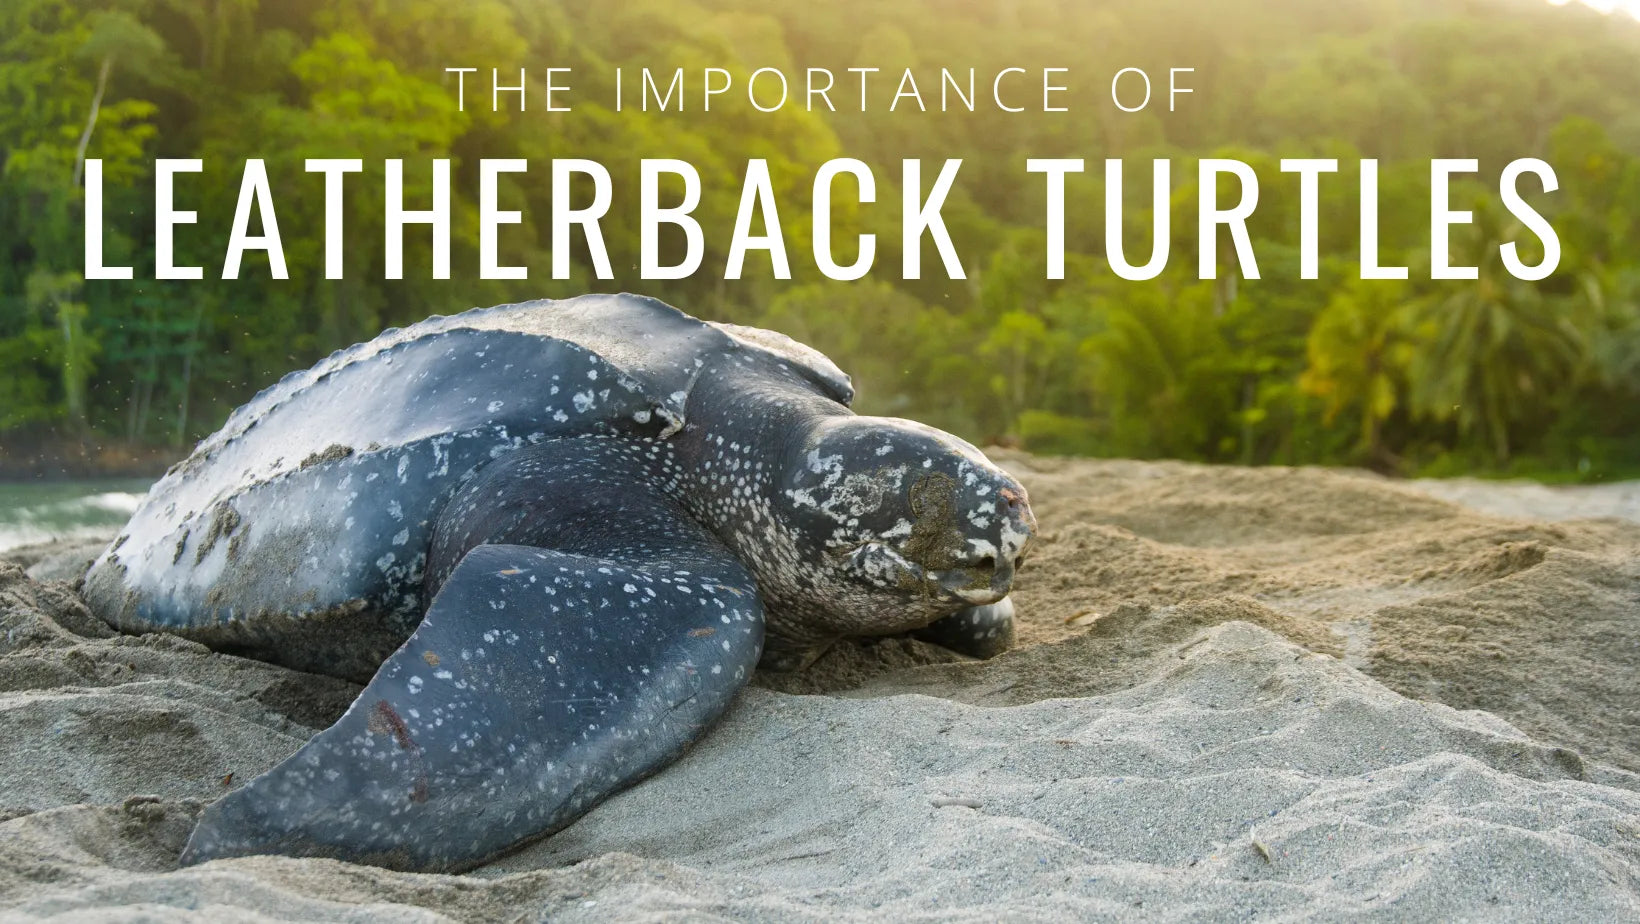 Meander kan opfattes Årligt All about leatherback turtles and their importance to the marine ecosystem.